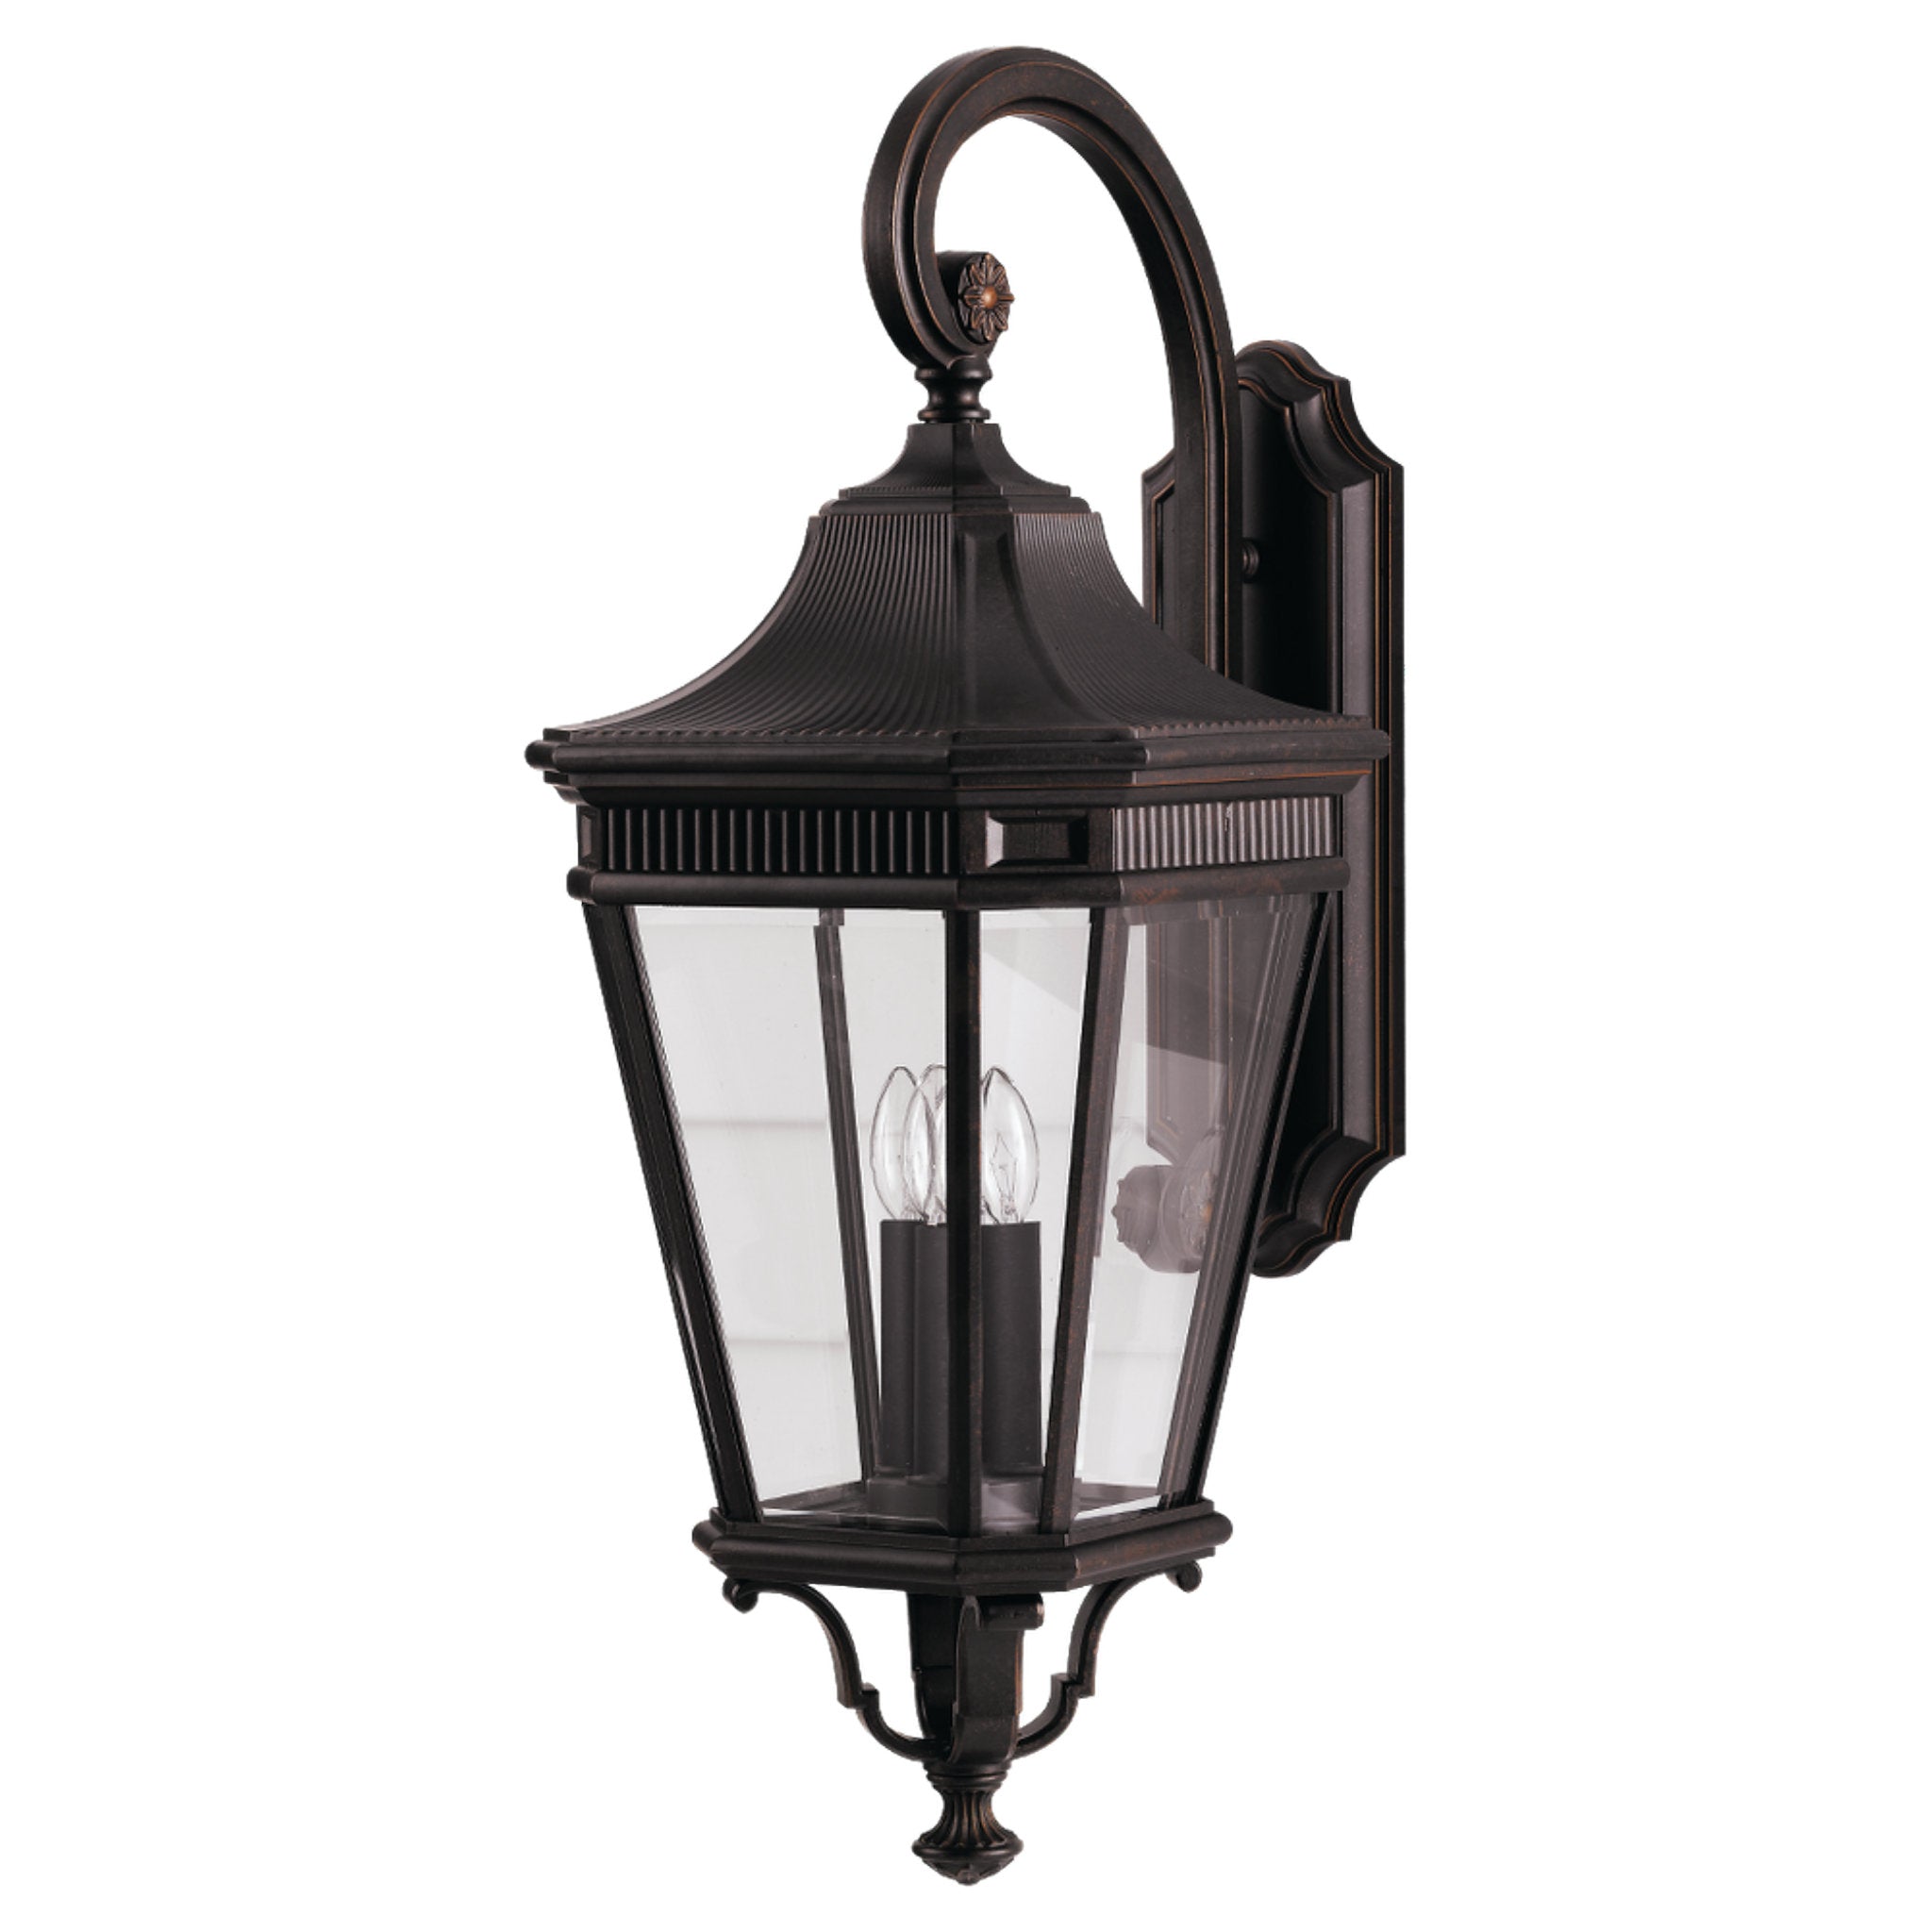 Cotswold Lane Large Lantern Traditional Outdoor Fixture 12" Width 30" Height Aluminum Irregular Clear Beveled Shade in Grecian Bronze